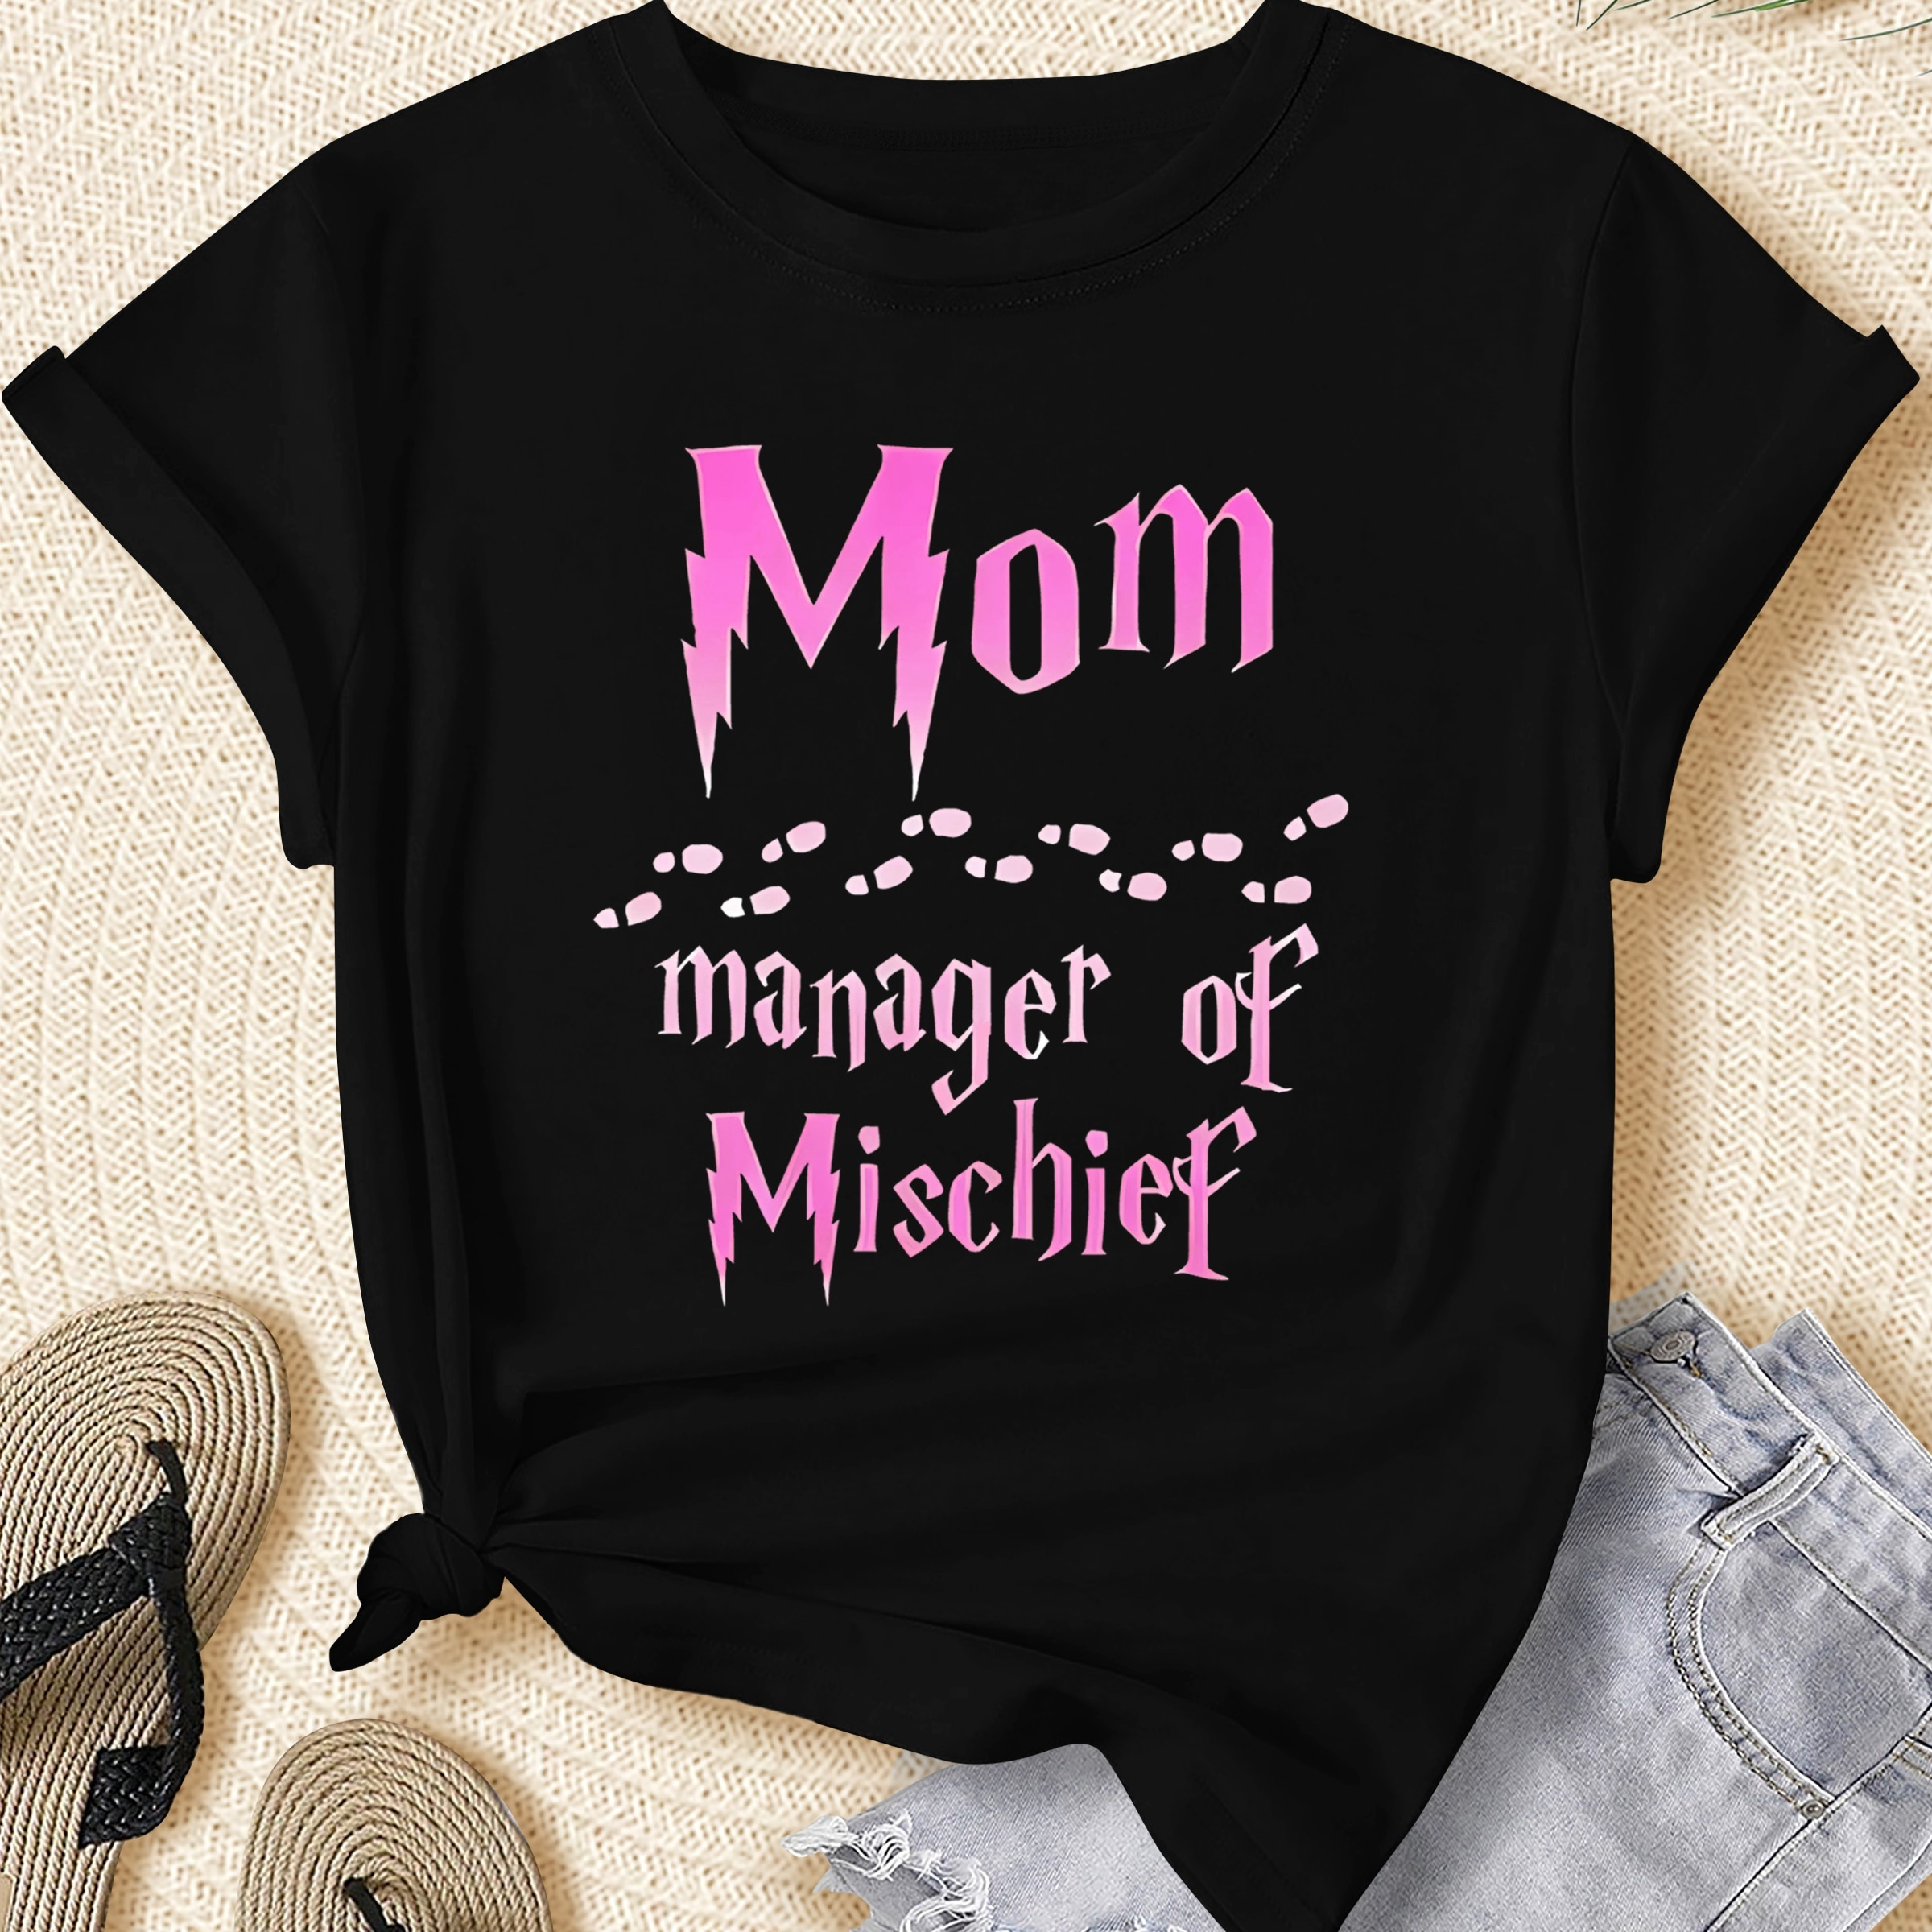 

Women's Plus Size Casual Sporty T-shirt, "mom Manager Of Mischief" Print, Comfort Fit Short Sleeve Tee, Fashion Breathable Casual Top